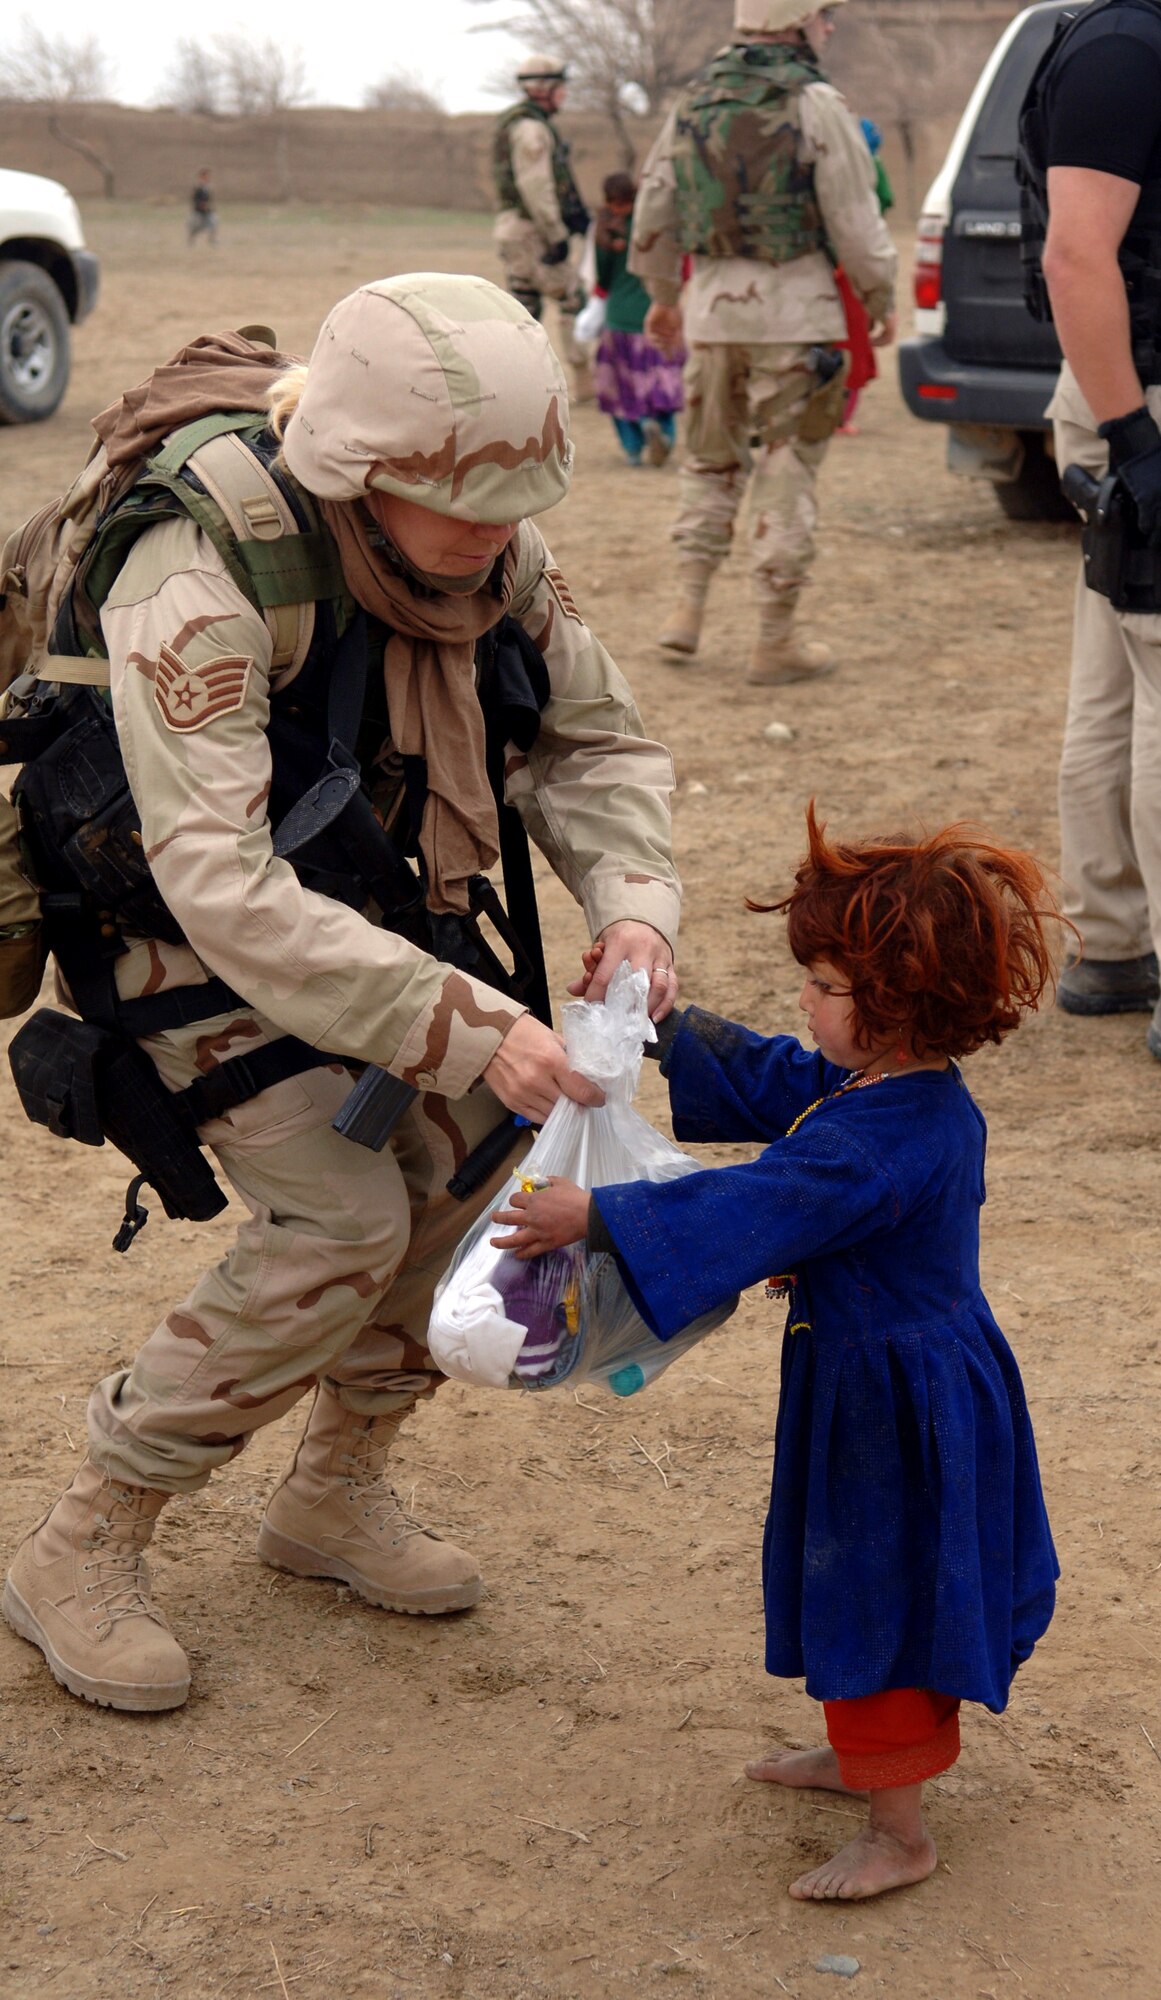 Staff Sgt. Karen Bishop hands clothes to a young girl from the village of Gadia, Afghanistan. Sergeant Bishop is a special tactics analyst assigned to the 455th Expeditionary Special Tactics Squadron at Bagram Air Base, Afghanistan. The Reservist is deployed from the 123rd Special Tactics Squadron at Standiford Field, Louisville, Ky. (U.S. Air Force photo/Staff Sgt. Jennifer Redente) 